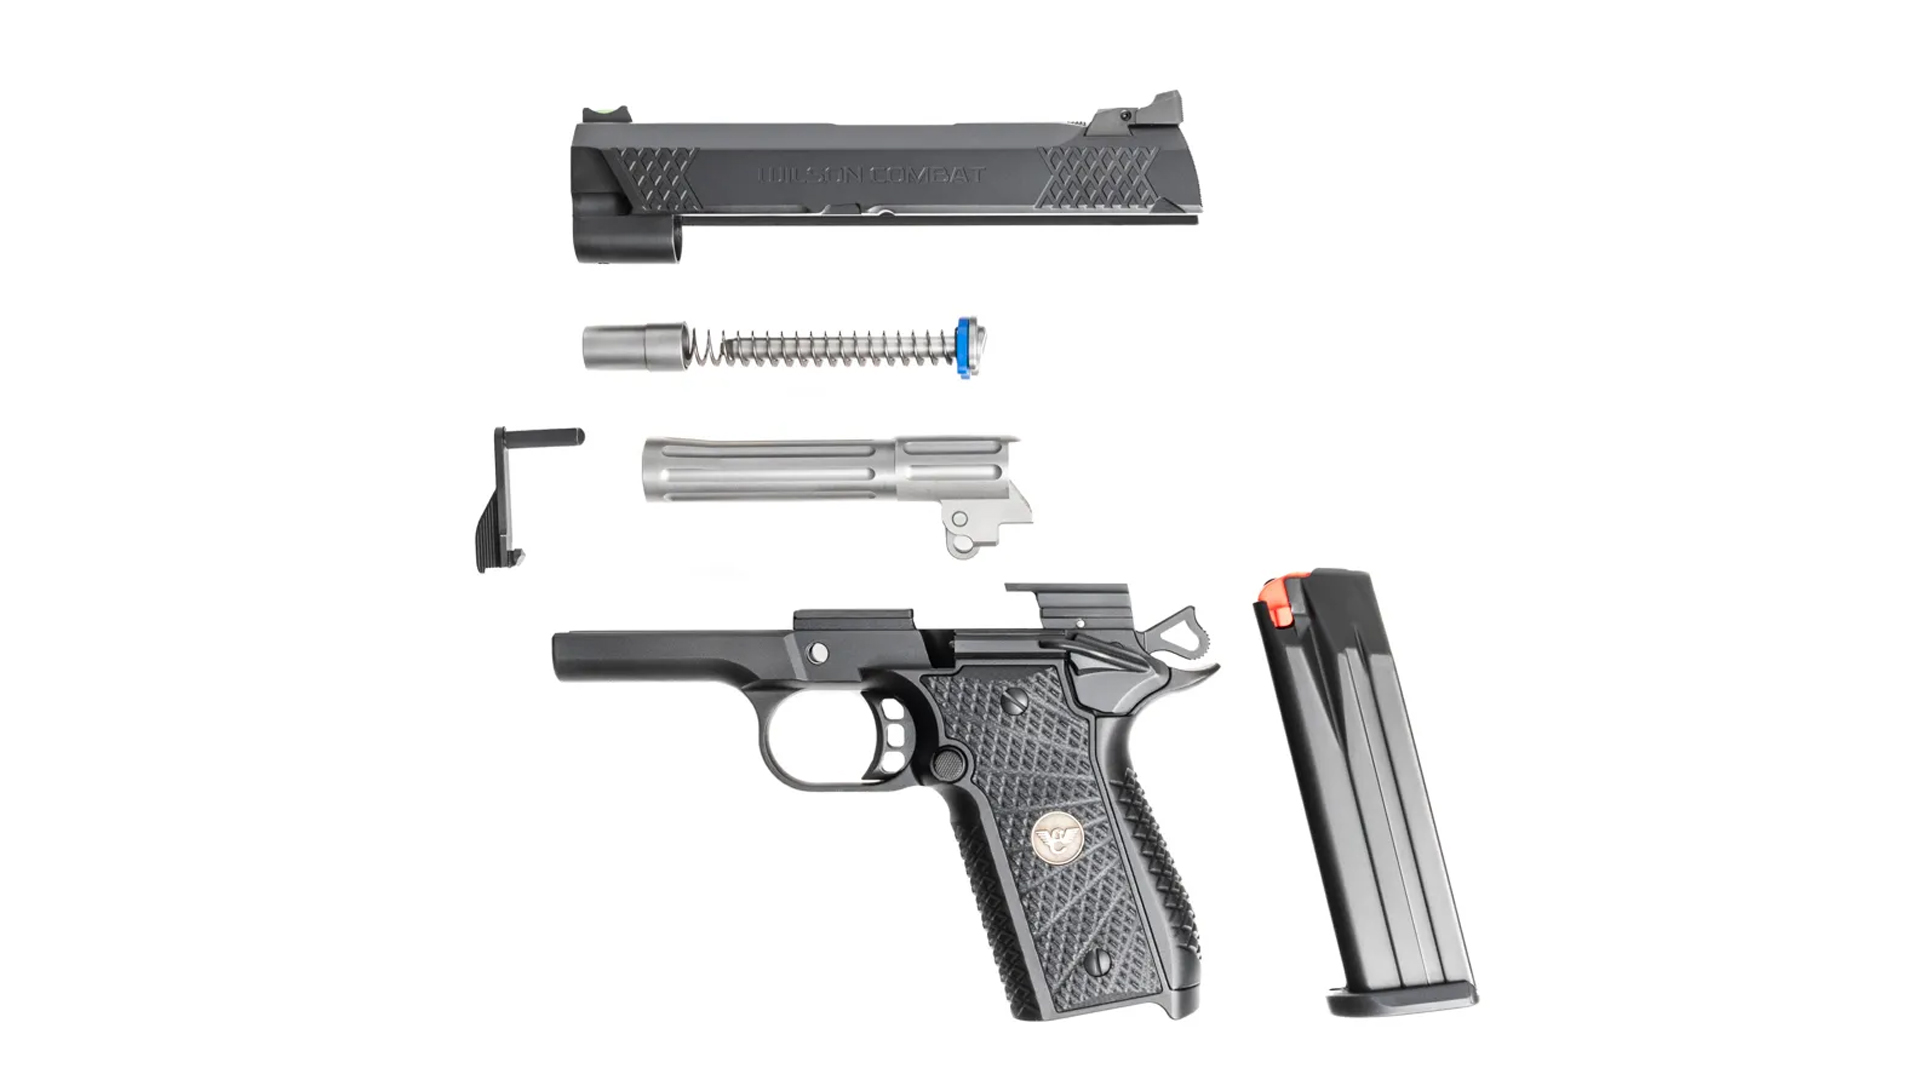 A disassembled view of the Wilson Combat EDC X9 2.0 pistol.